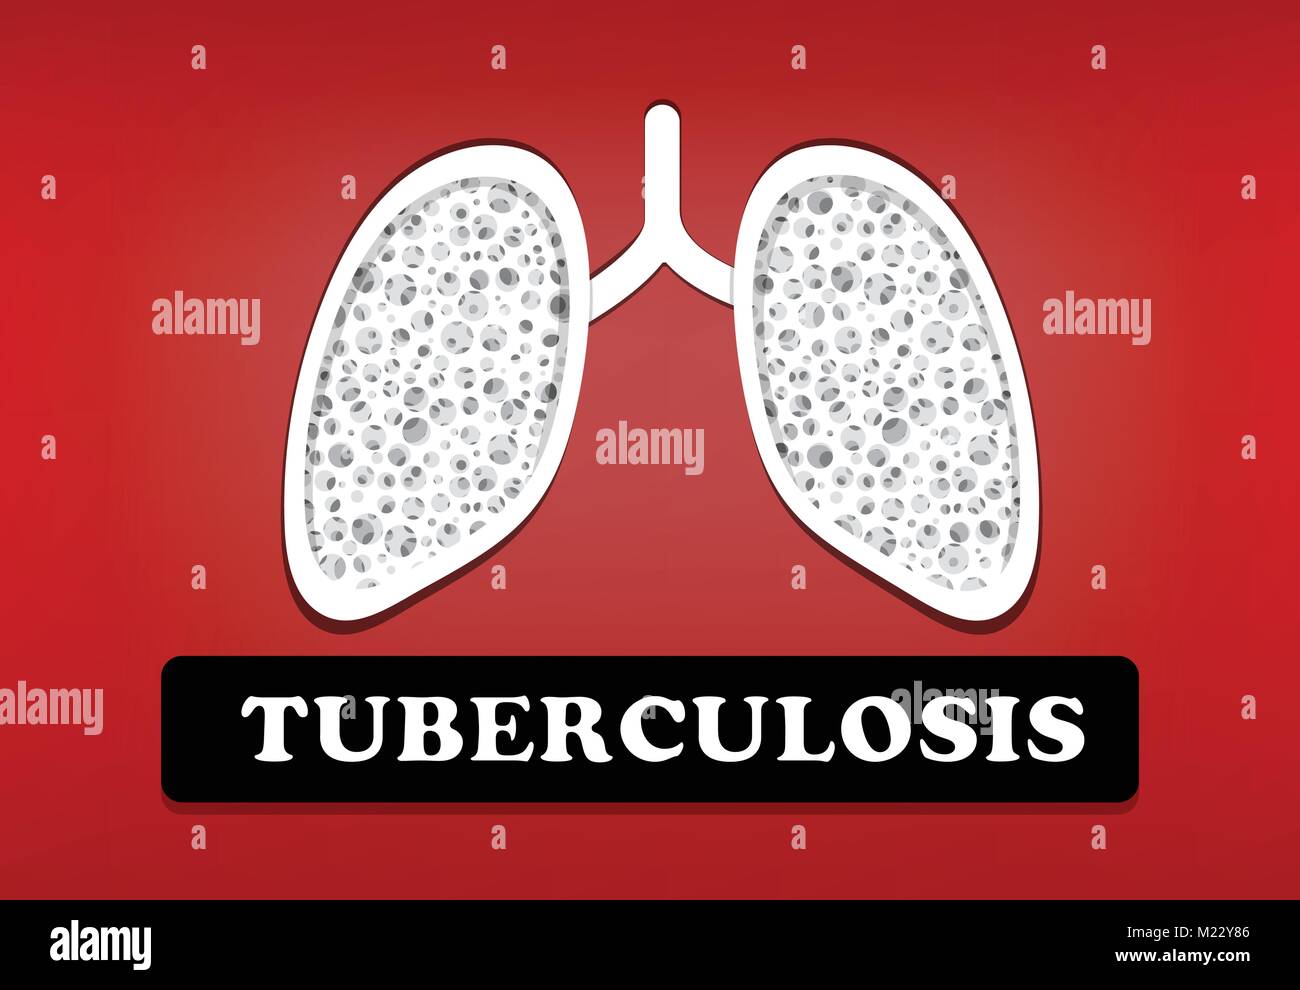 Tuberculosis, Lung Cancer in vector art design Stock Vector